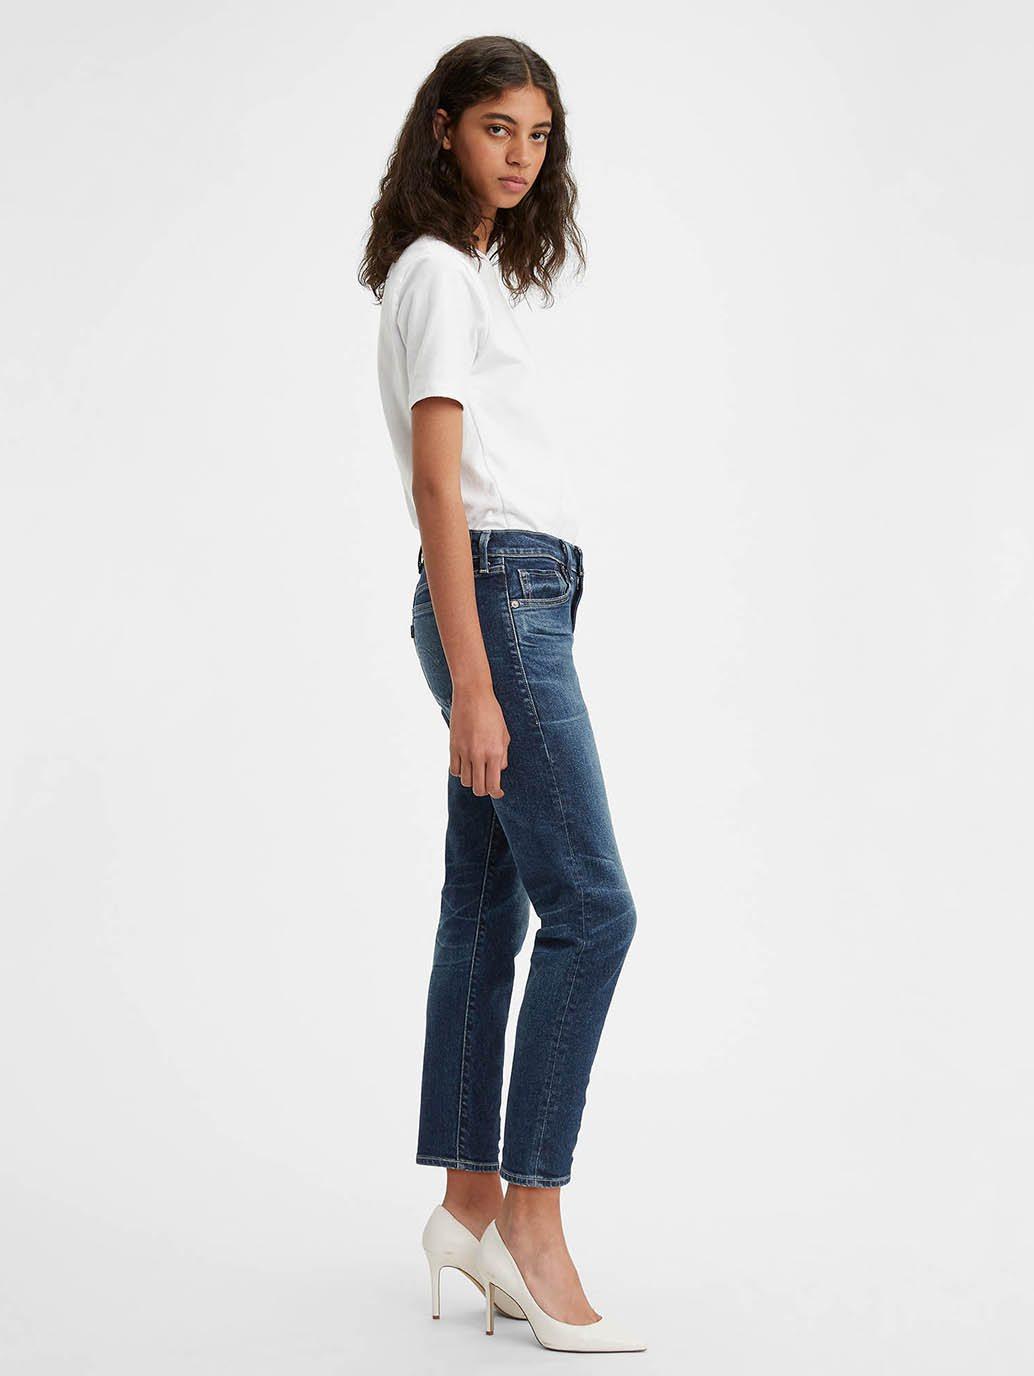 Buy Levi's® Made & Crafted® Made In Japan Boyfriend Jeans | Levi's